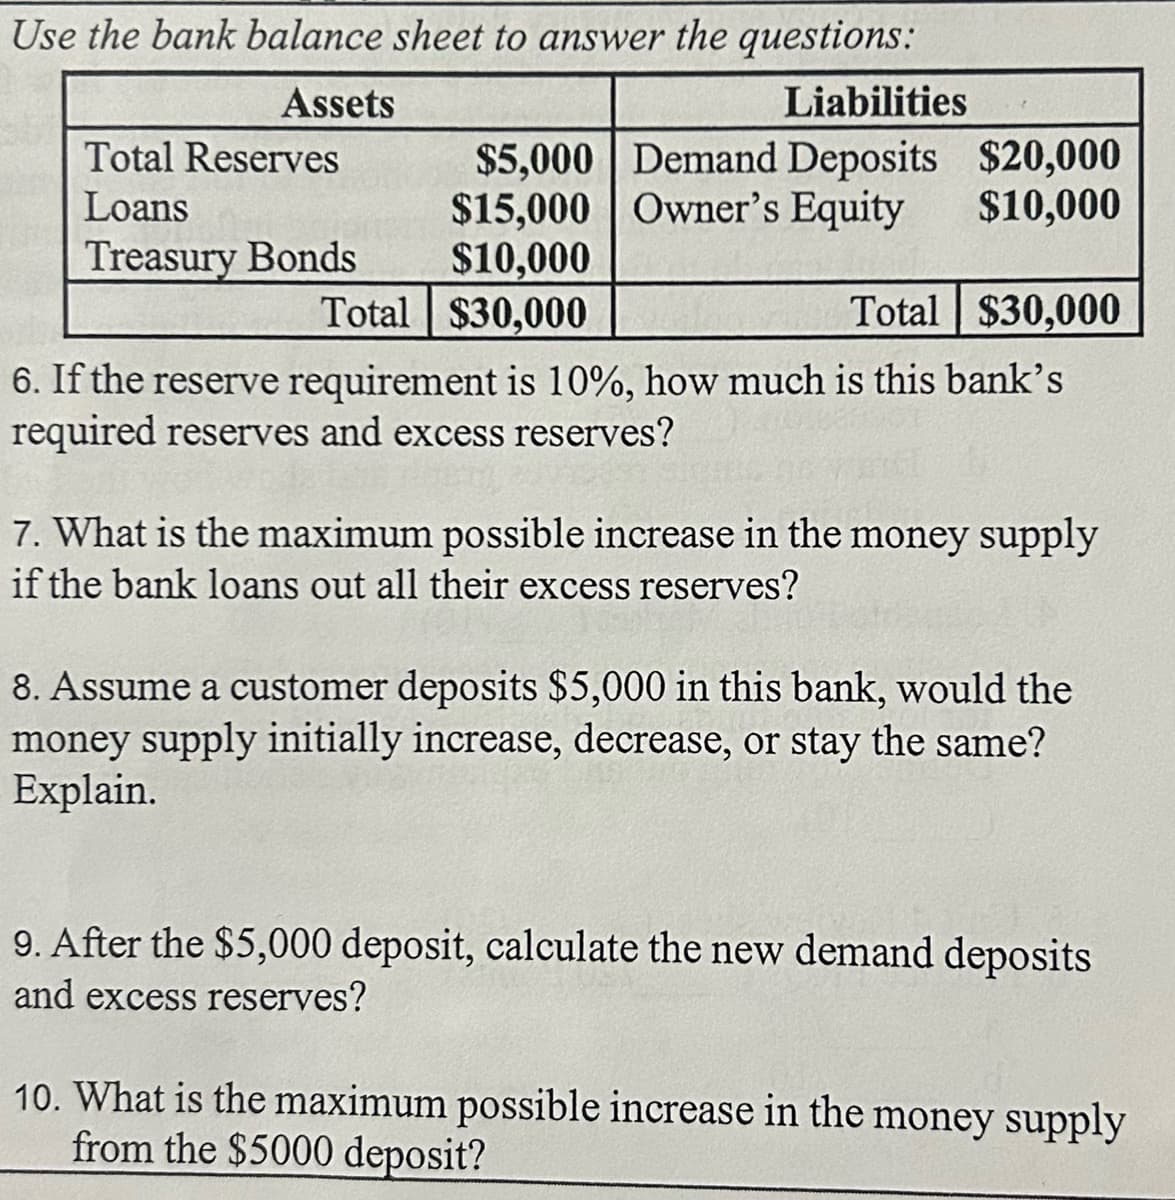 Use the bank balance sheet to answer the questions:
Assets
Total Reserves
Loans
Treasury Bonds
Liabilities
$5,000 Demand Deposits $20,000
$15,000 Owner's Equity $10,000
$10,000
Total $30,000
6. If the reserve requirement is 10%, how much is this bank's
required reserves and excess reserves?
Total $30,000
7. What is the maximum possible increase in the money supply
if the bank loans out all their excess reserves?
8. Assume a customer deposits $5,000 in this bank, would the
money supply initially increase, decrease, or stay the same?
Explain.
9. After the $5,000 deposit, calculate the new demand deposits
and excess reserves?
10. What is the maximum possible increase in the money supply
from the $5000 deposit?